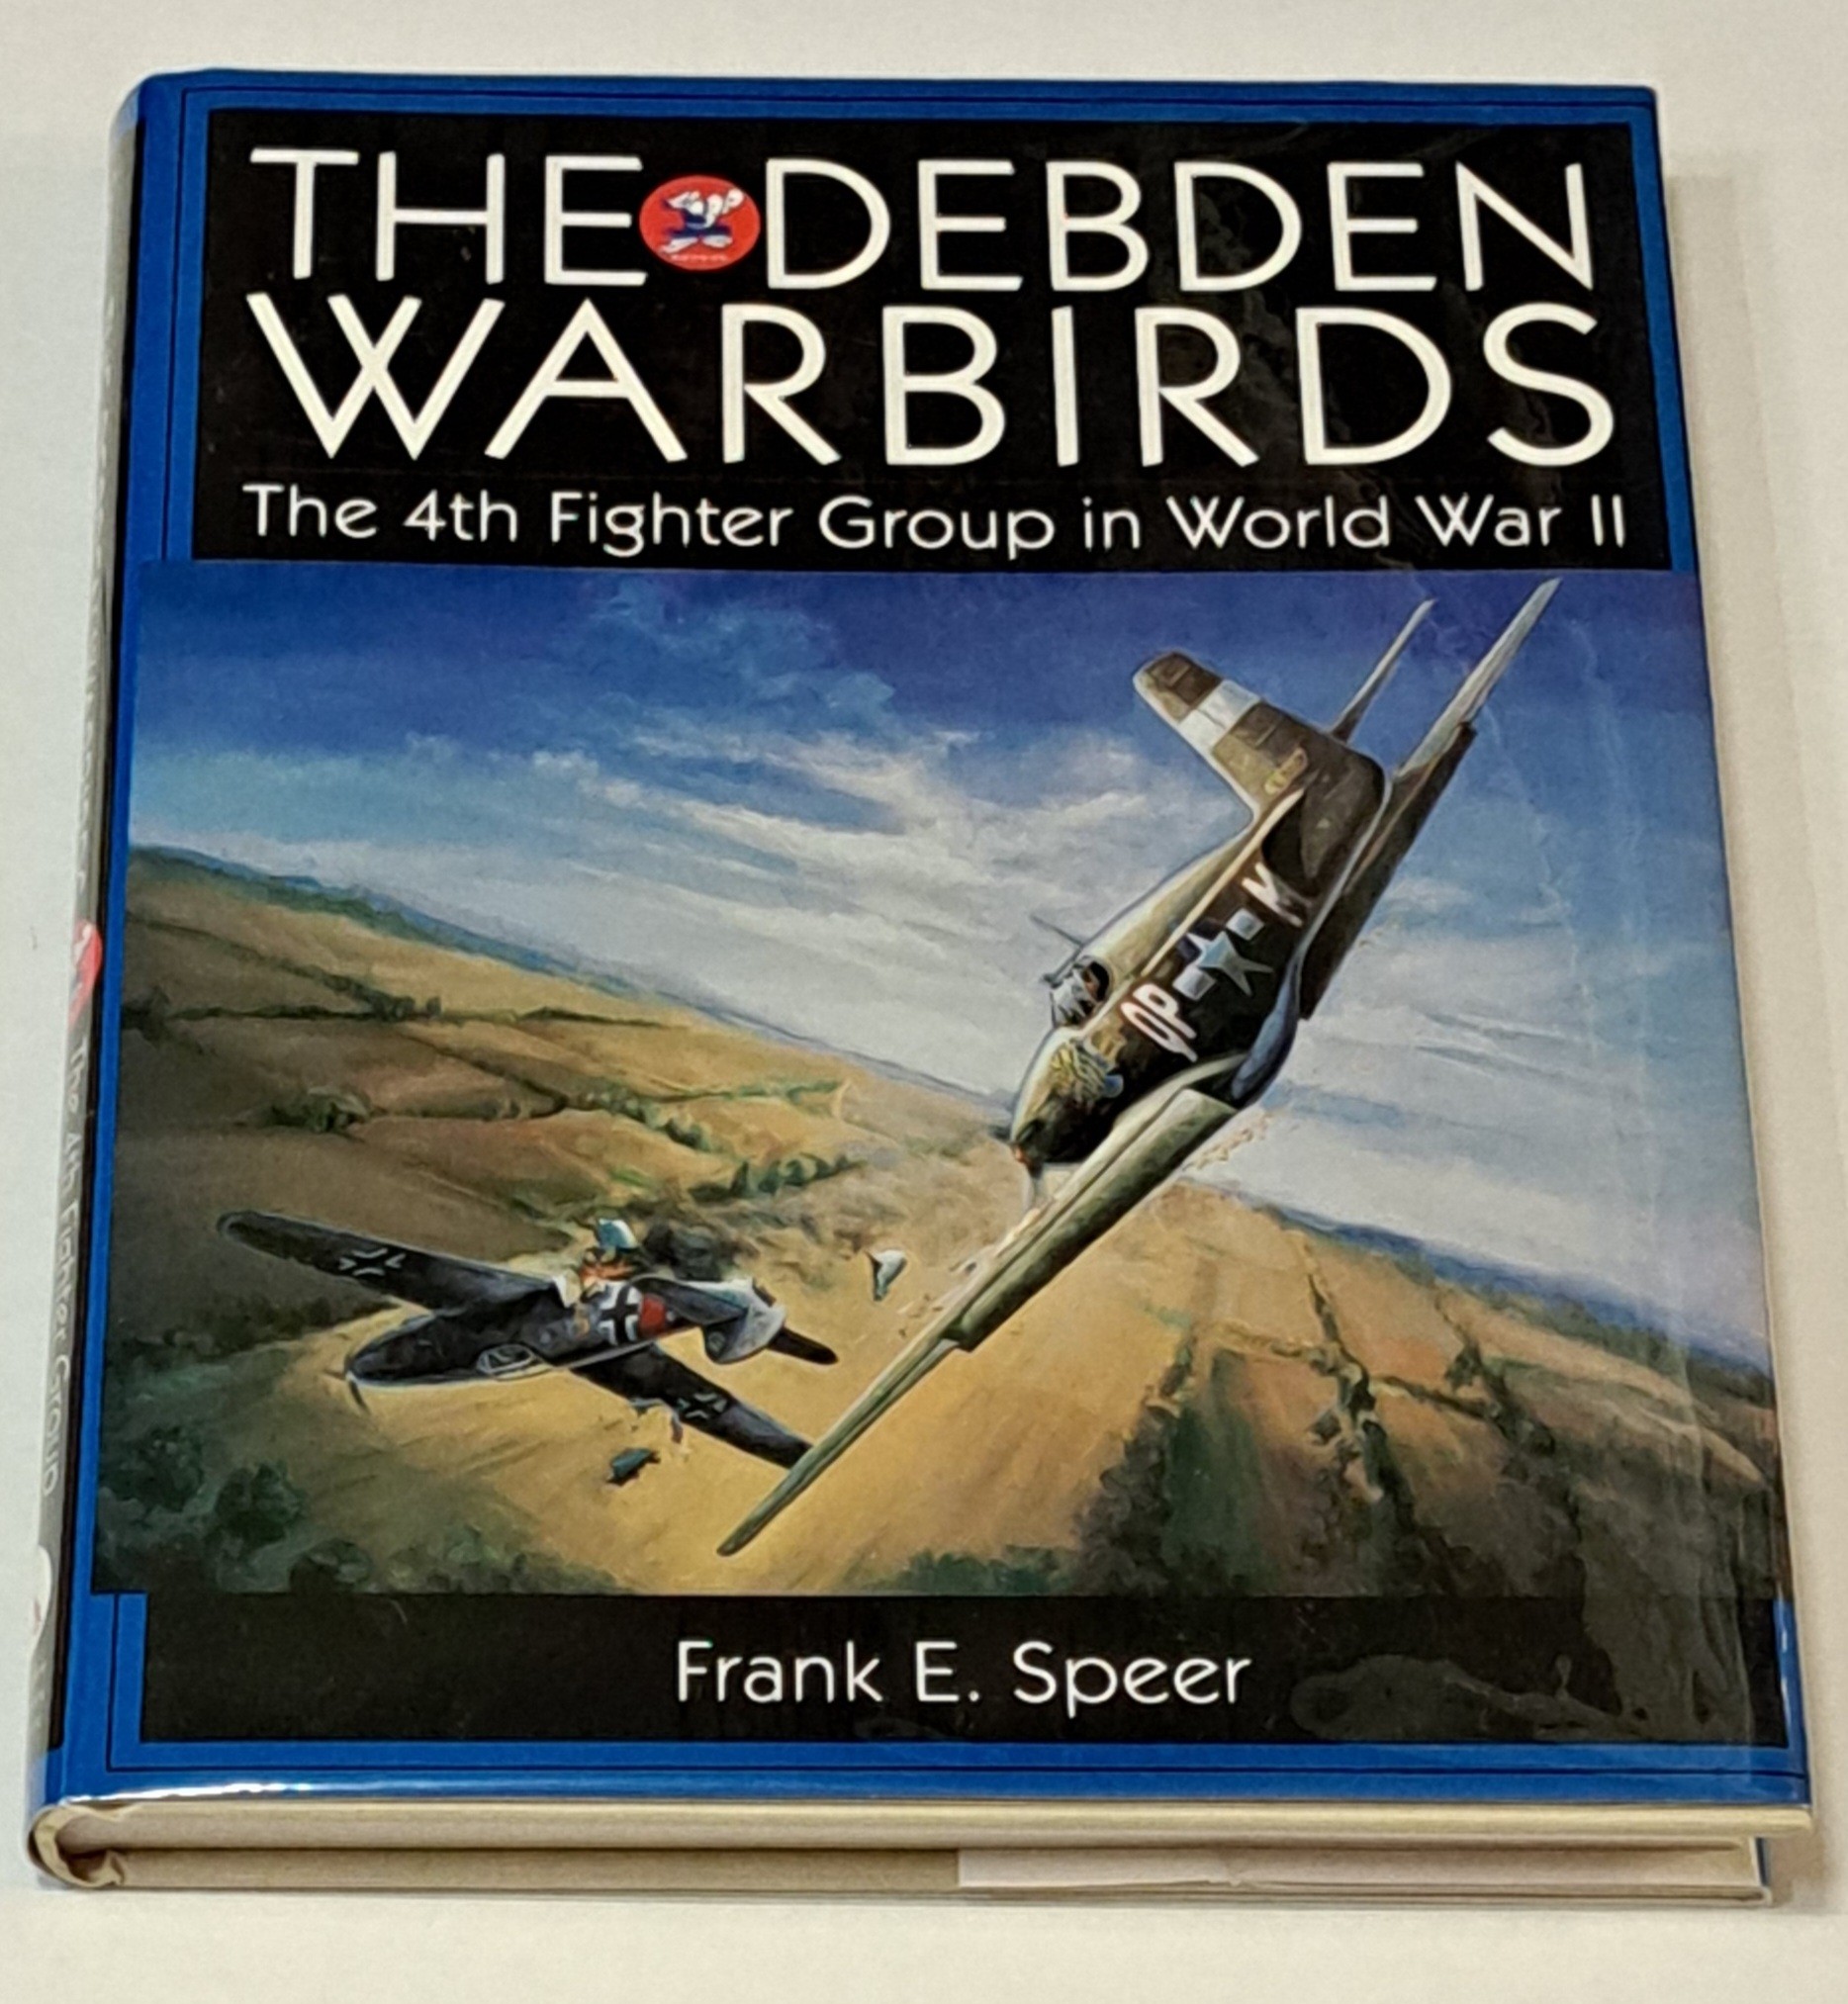 The Debden Warbirds - the 4th fighter group in WWII